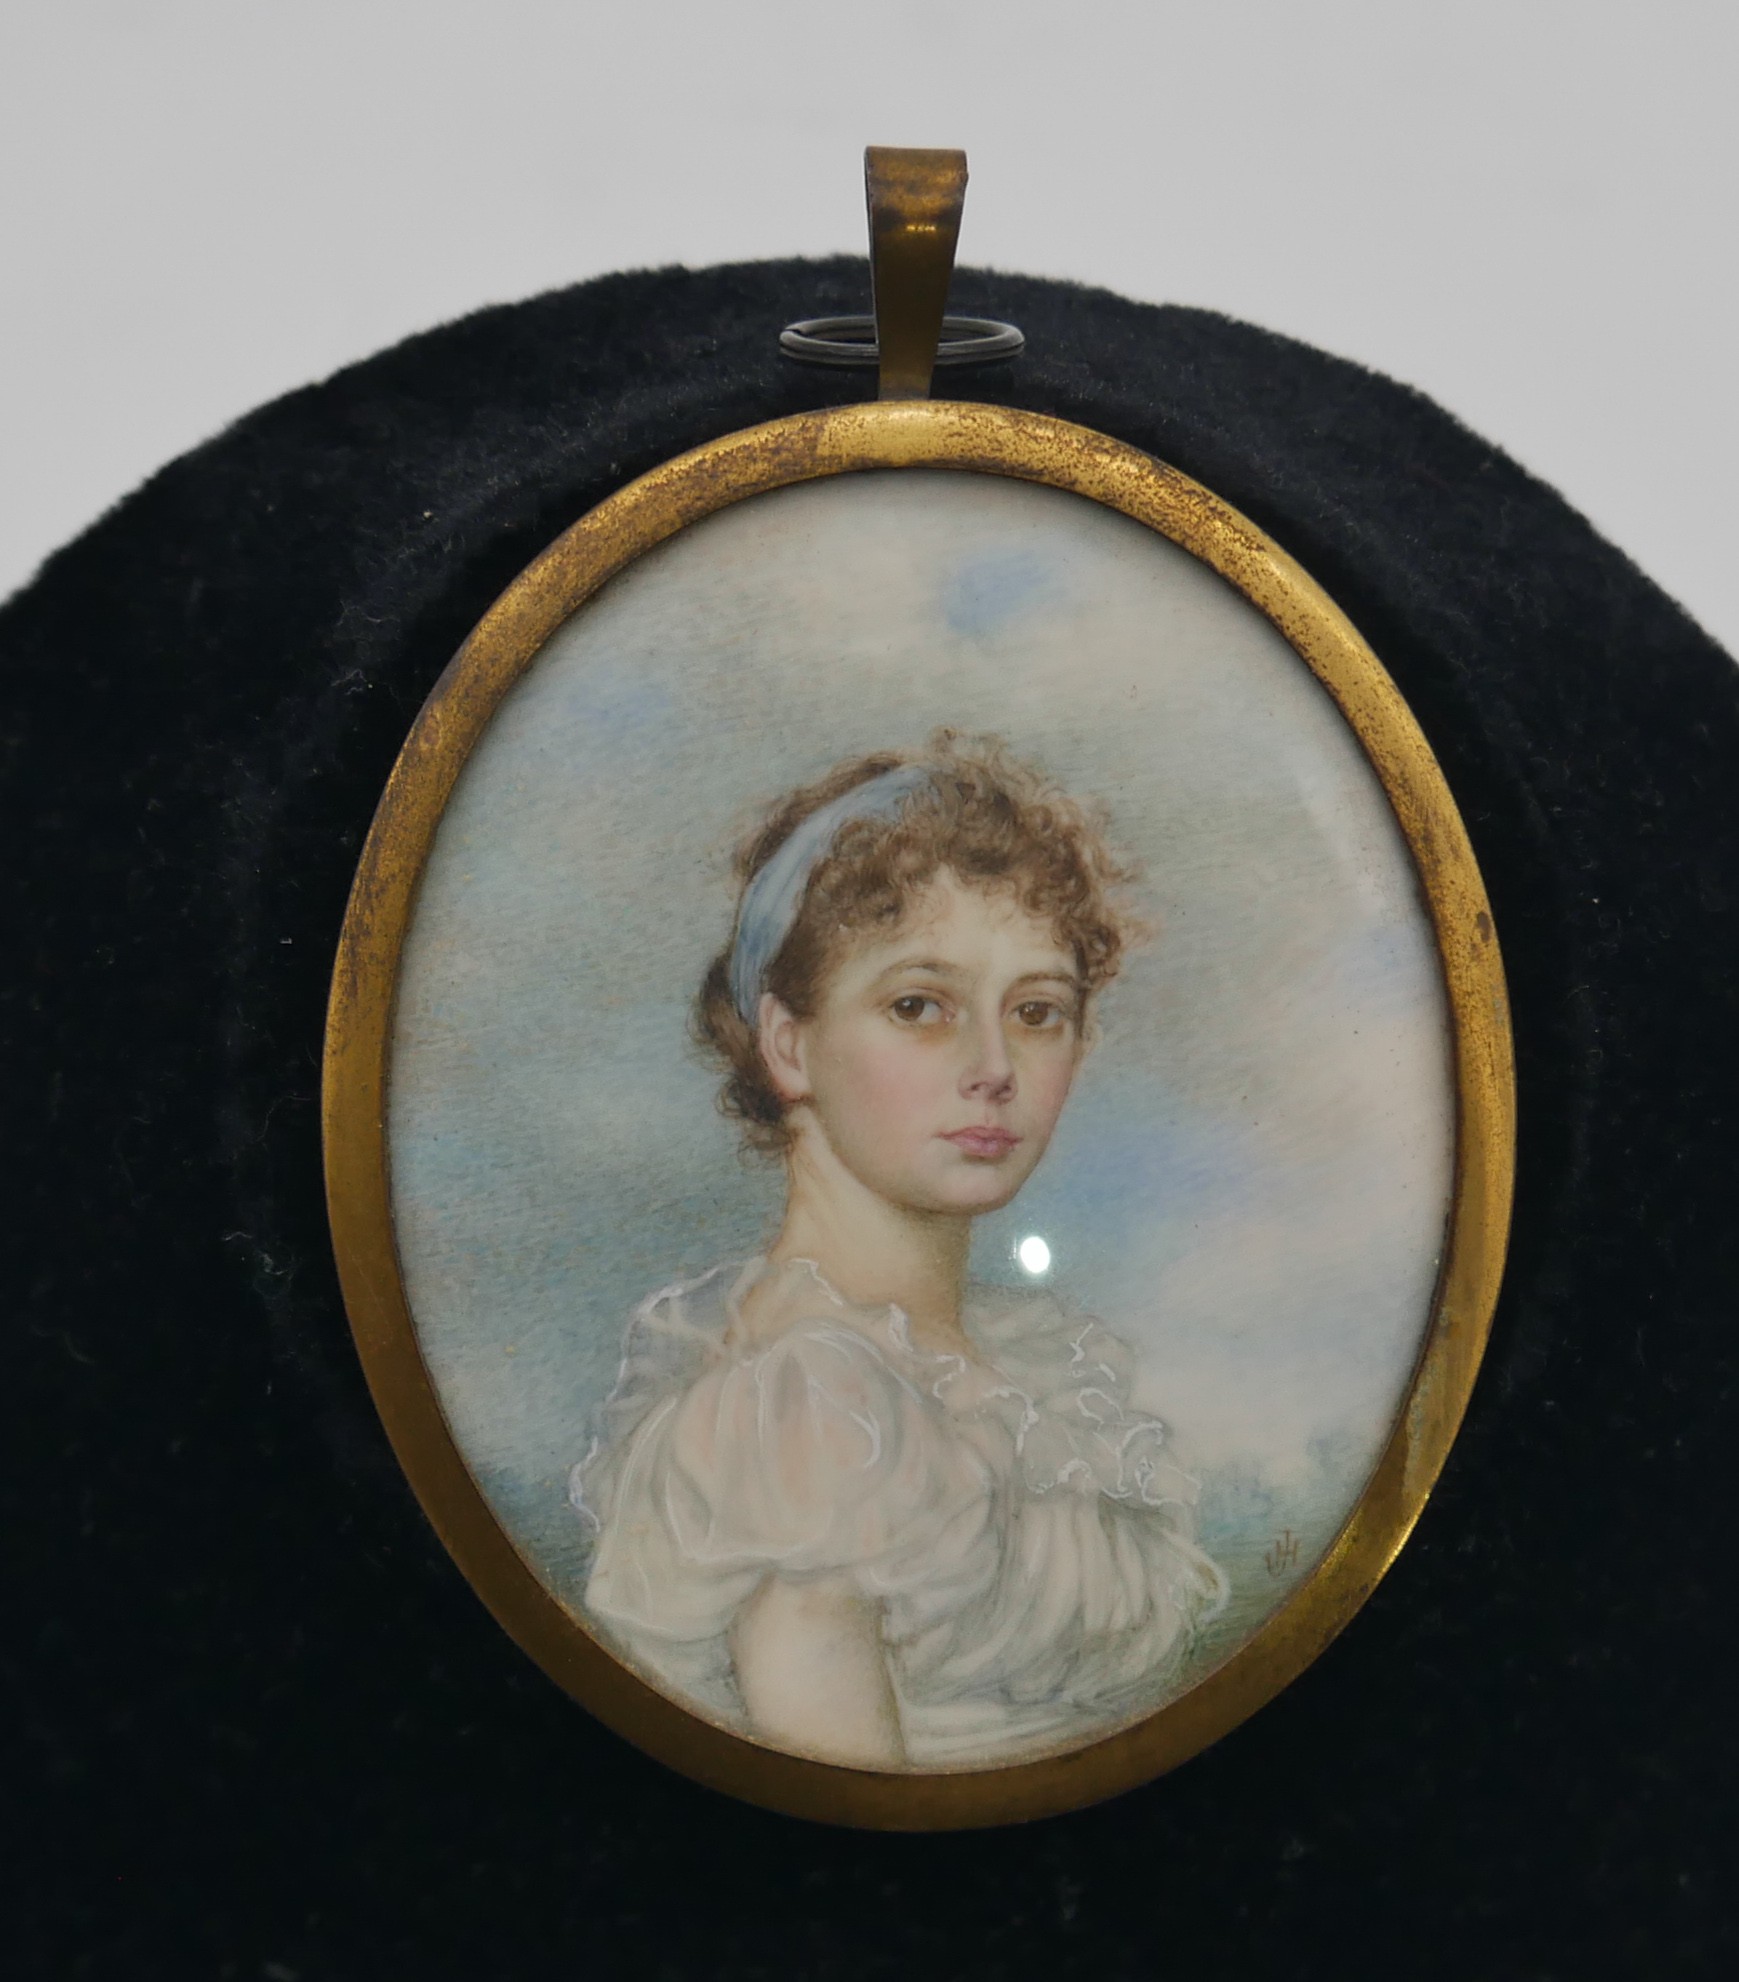 A framed and glazed oval potrait miniature of Beatrice J Hollway by Janet Hollway. Monogrammed JH